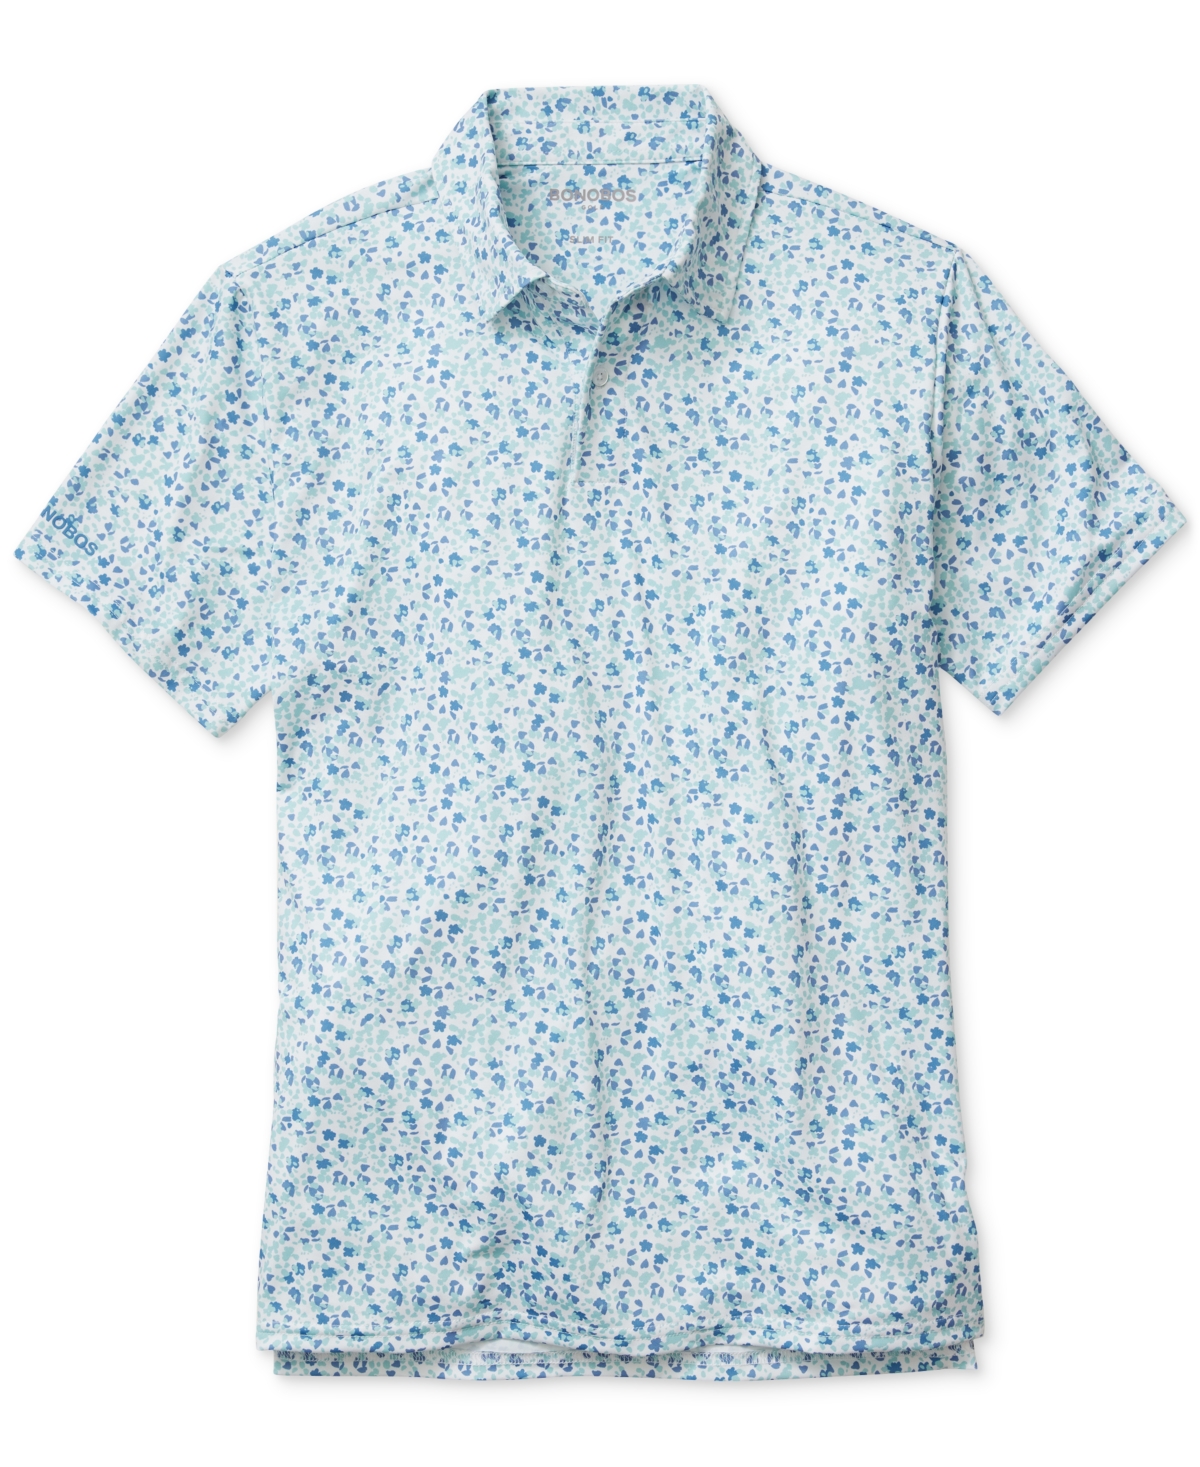 Men's Short Sleeve Abstract Print Performance Polo Shirt - Vell Floral